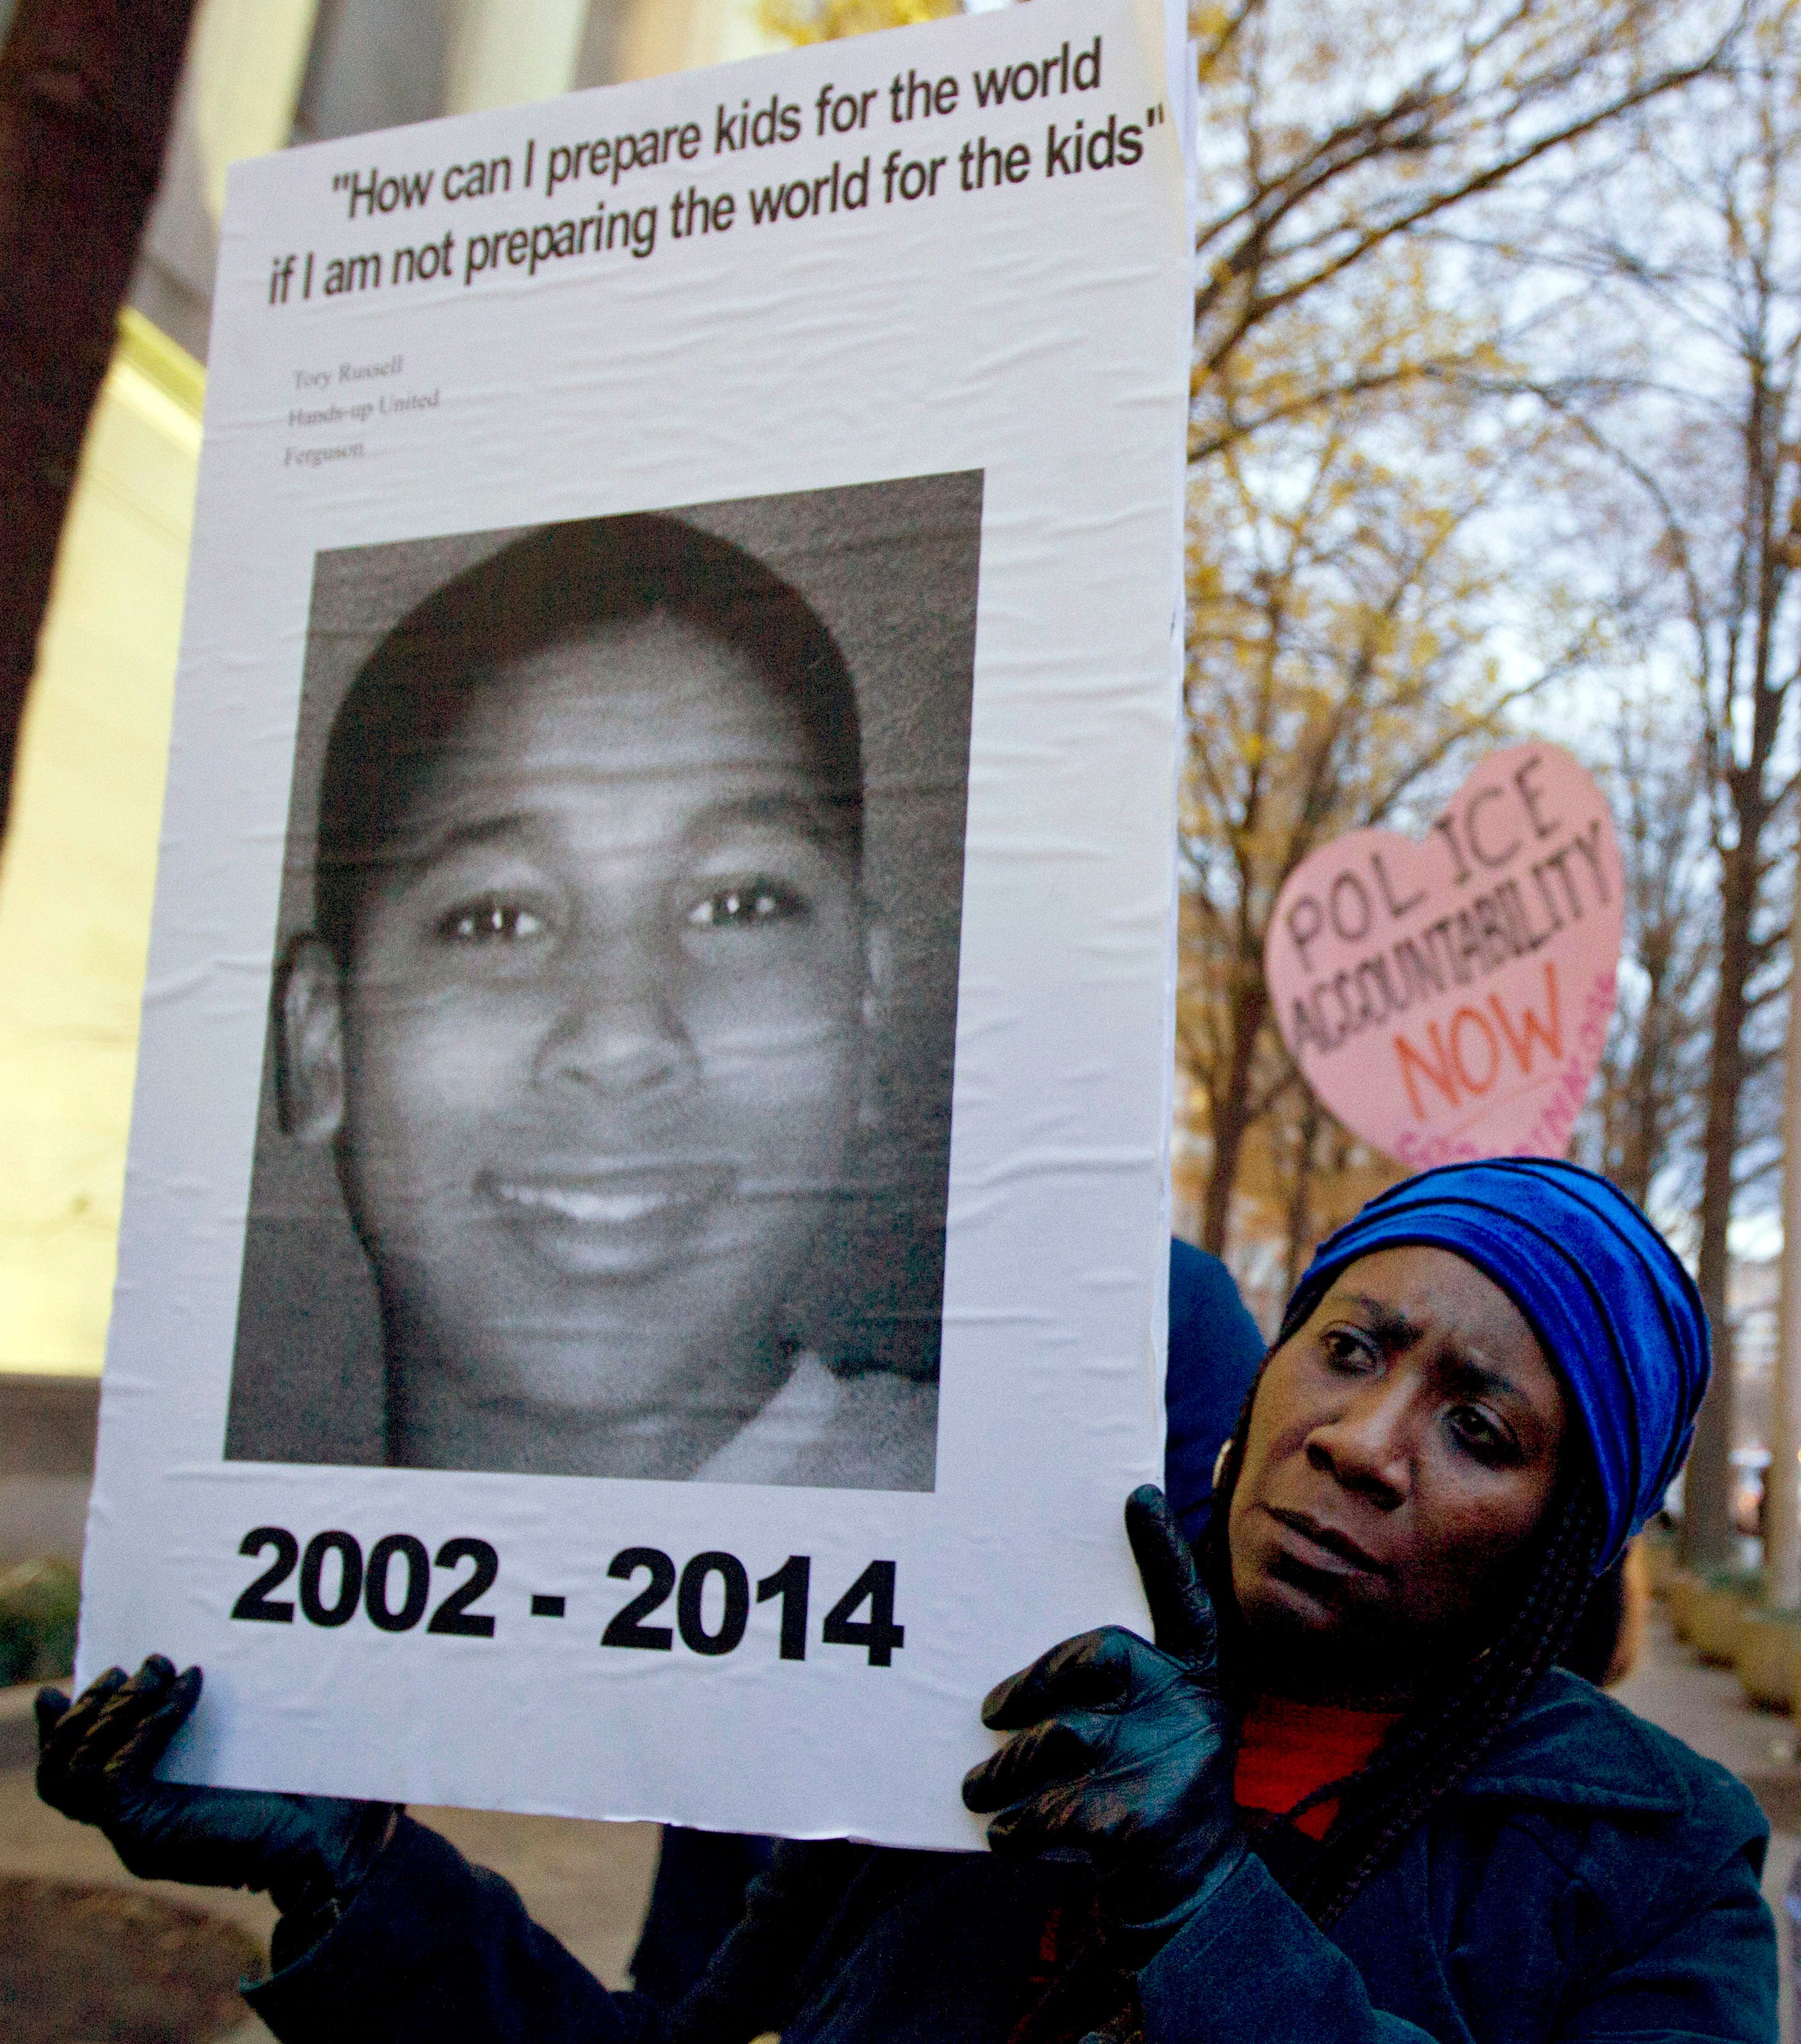 Cleveland Cops Involved In Tamir Rice’s Death Face Disciplinary Action After Internal Review
